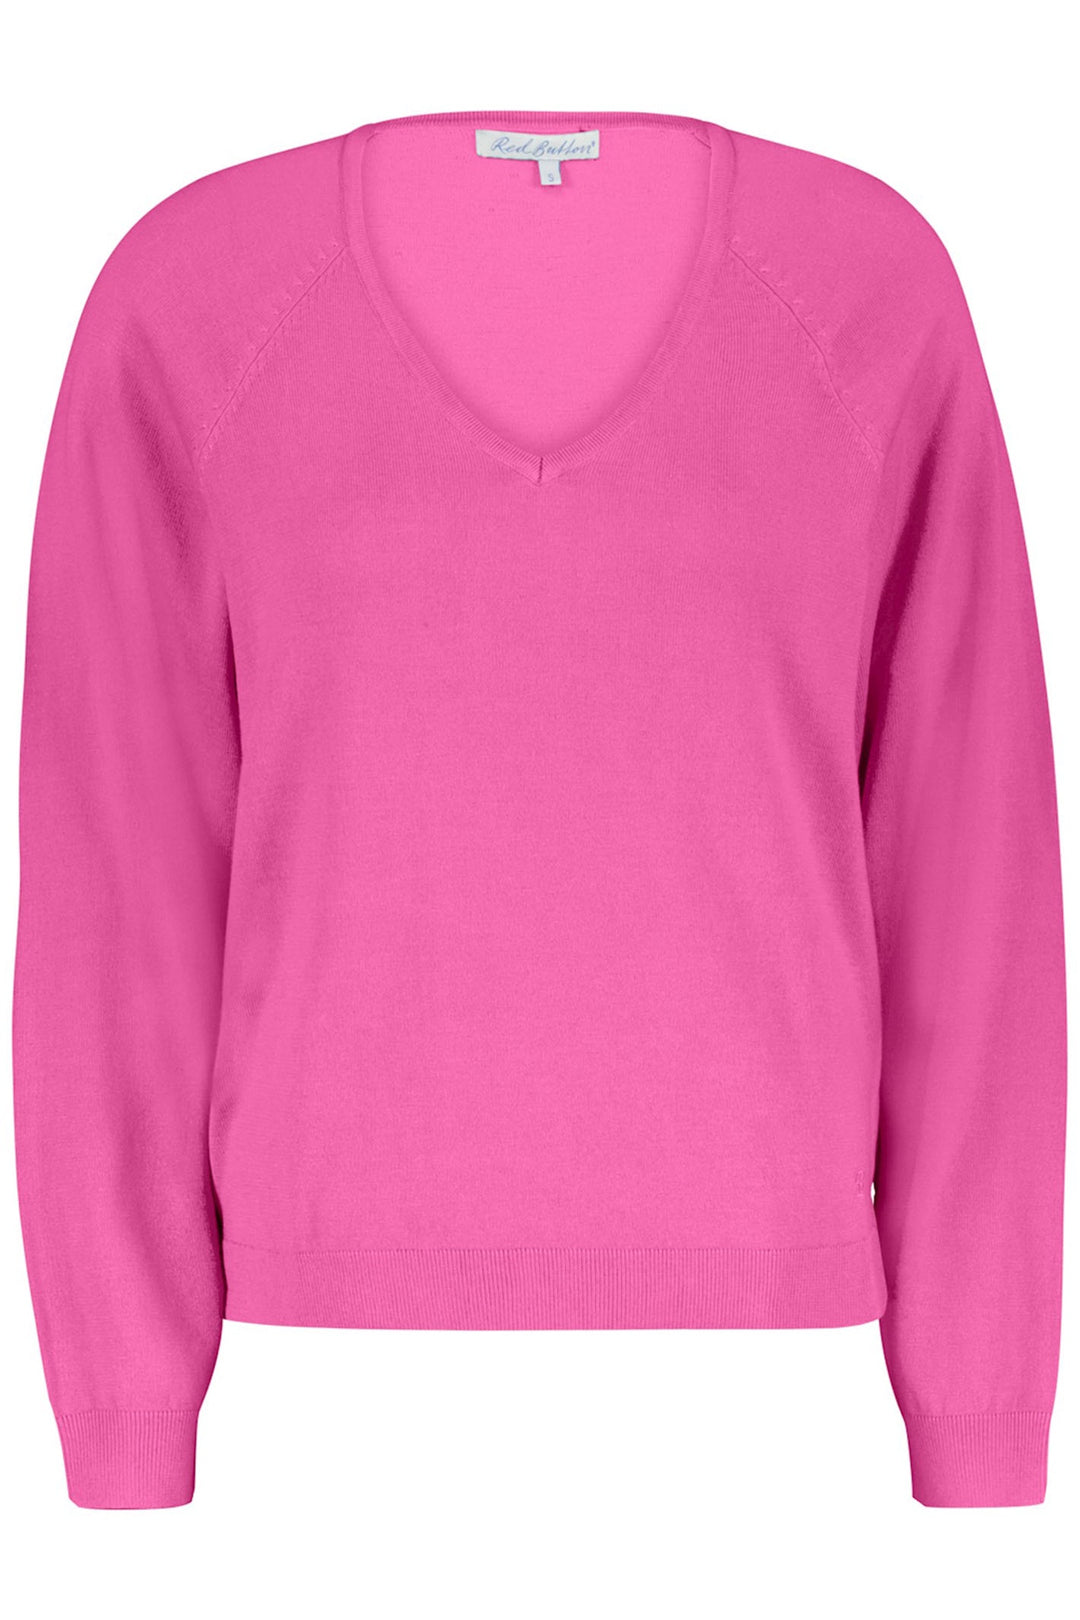 Red Button SRB4223 Fay Cyclaam Pink Fine Knit V Neck Jumper - Dotique